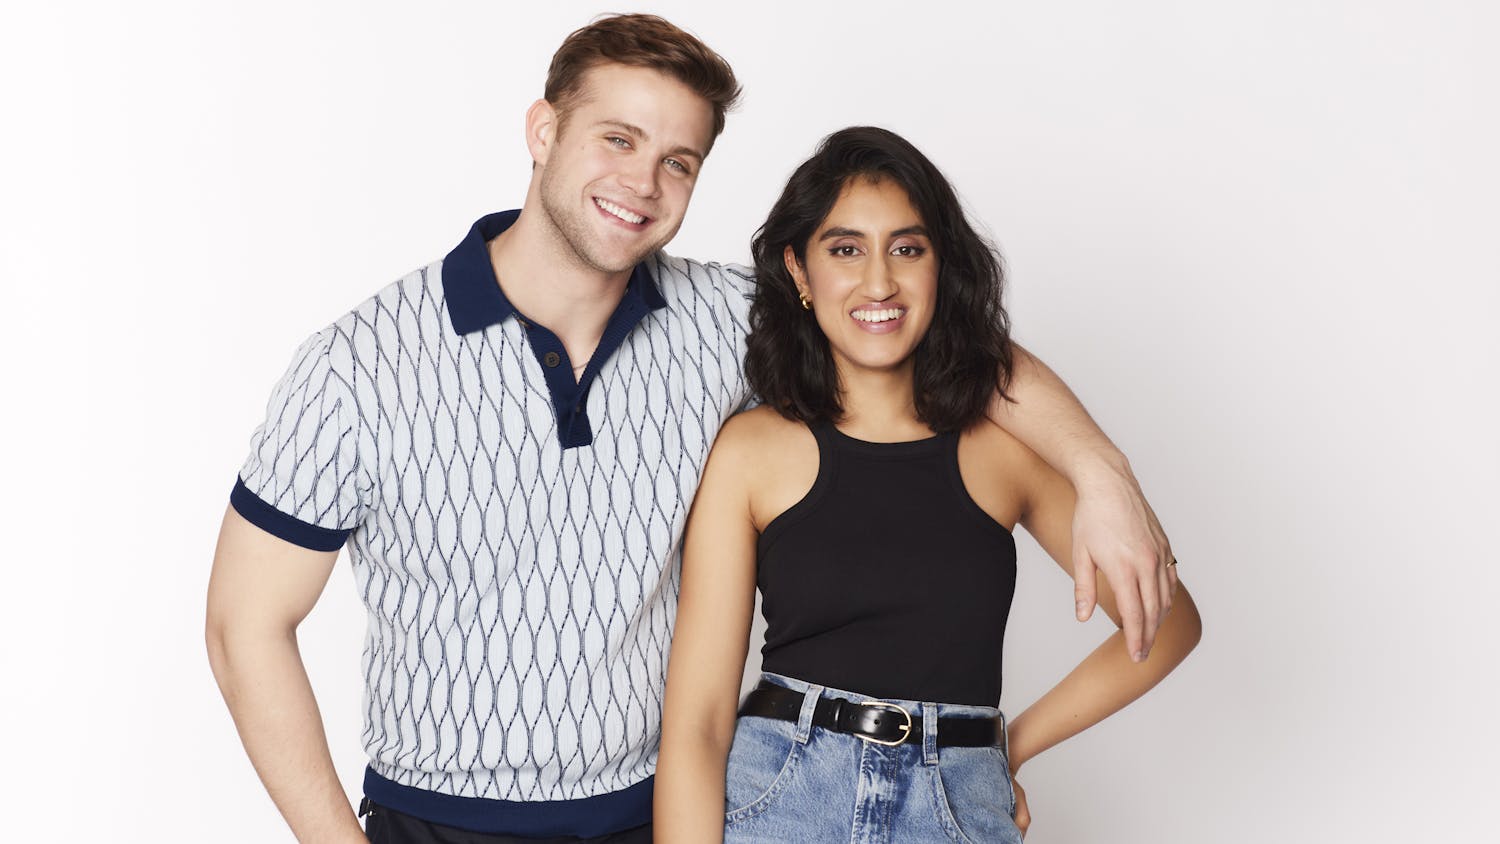 Leo Woodall and Ambika Mod pose together against a white background. He wears a patterned polo shirt and dark pants. She wears jeans and a black racerback tank.